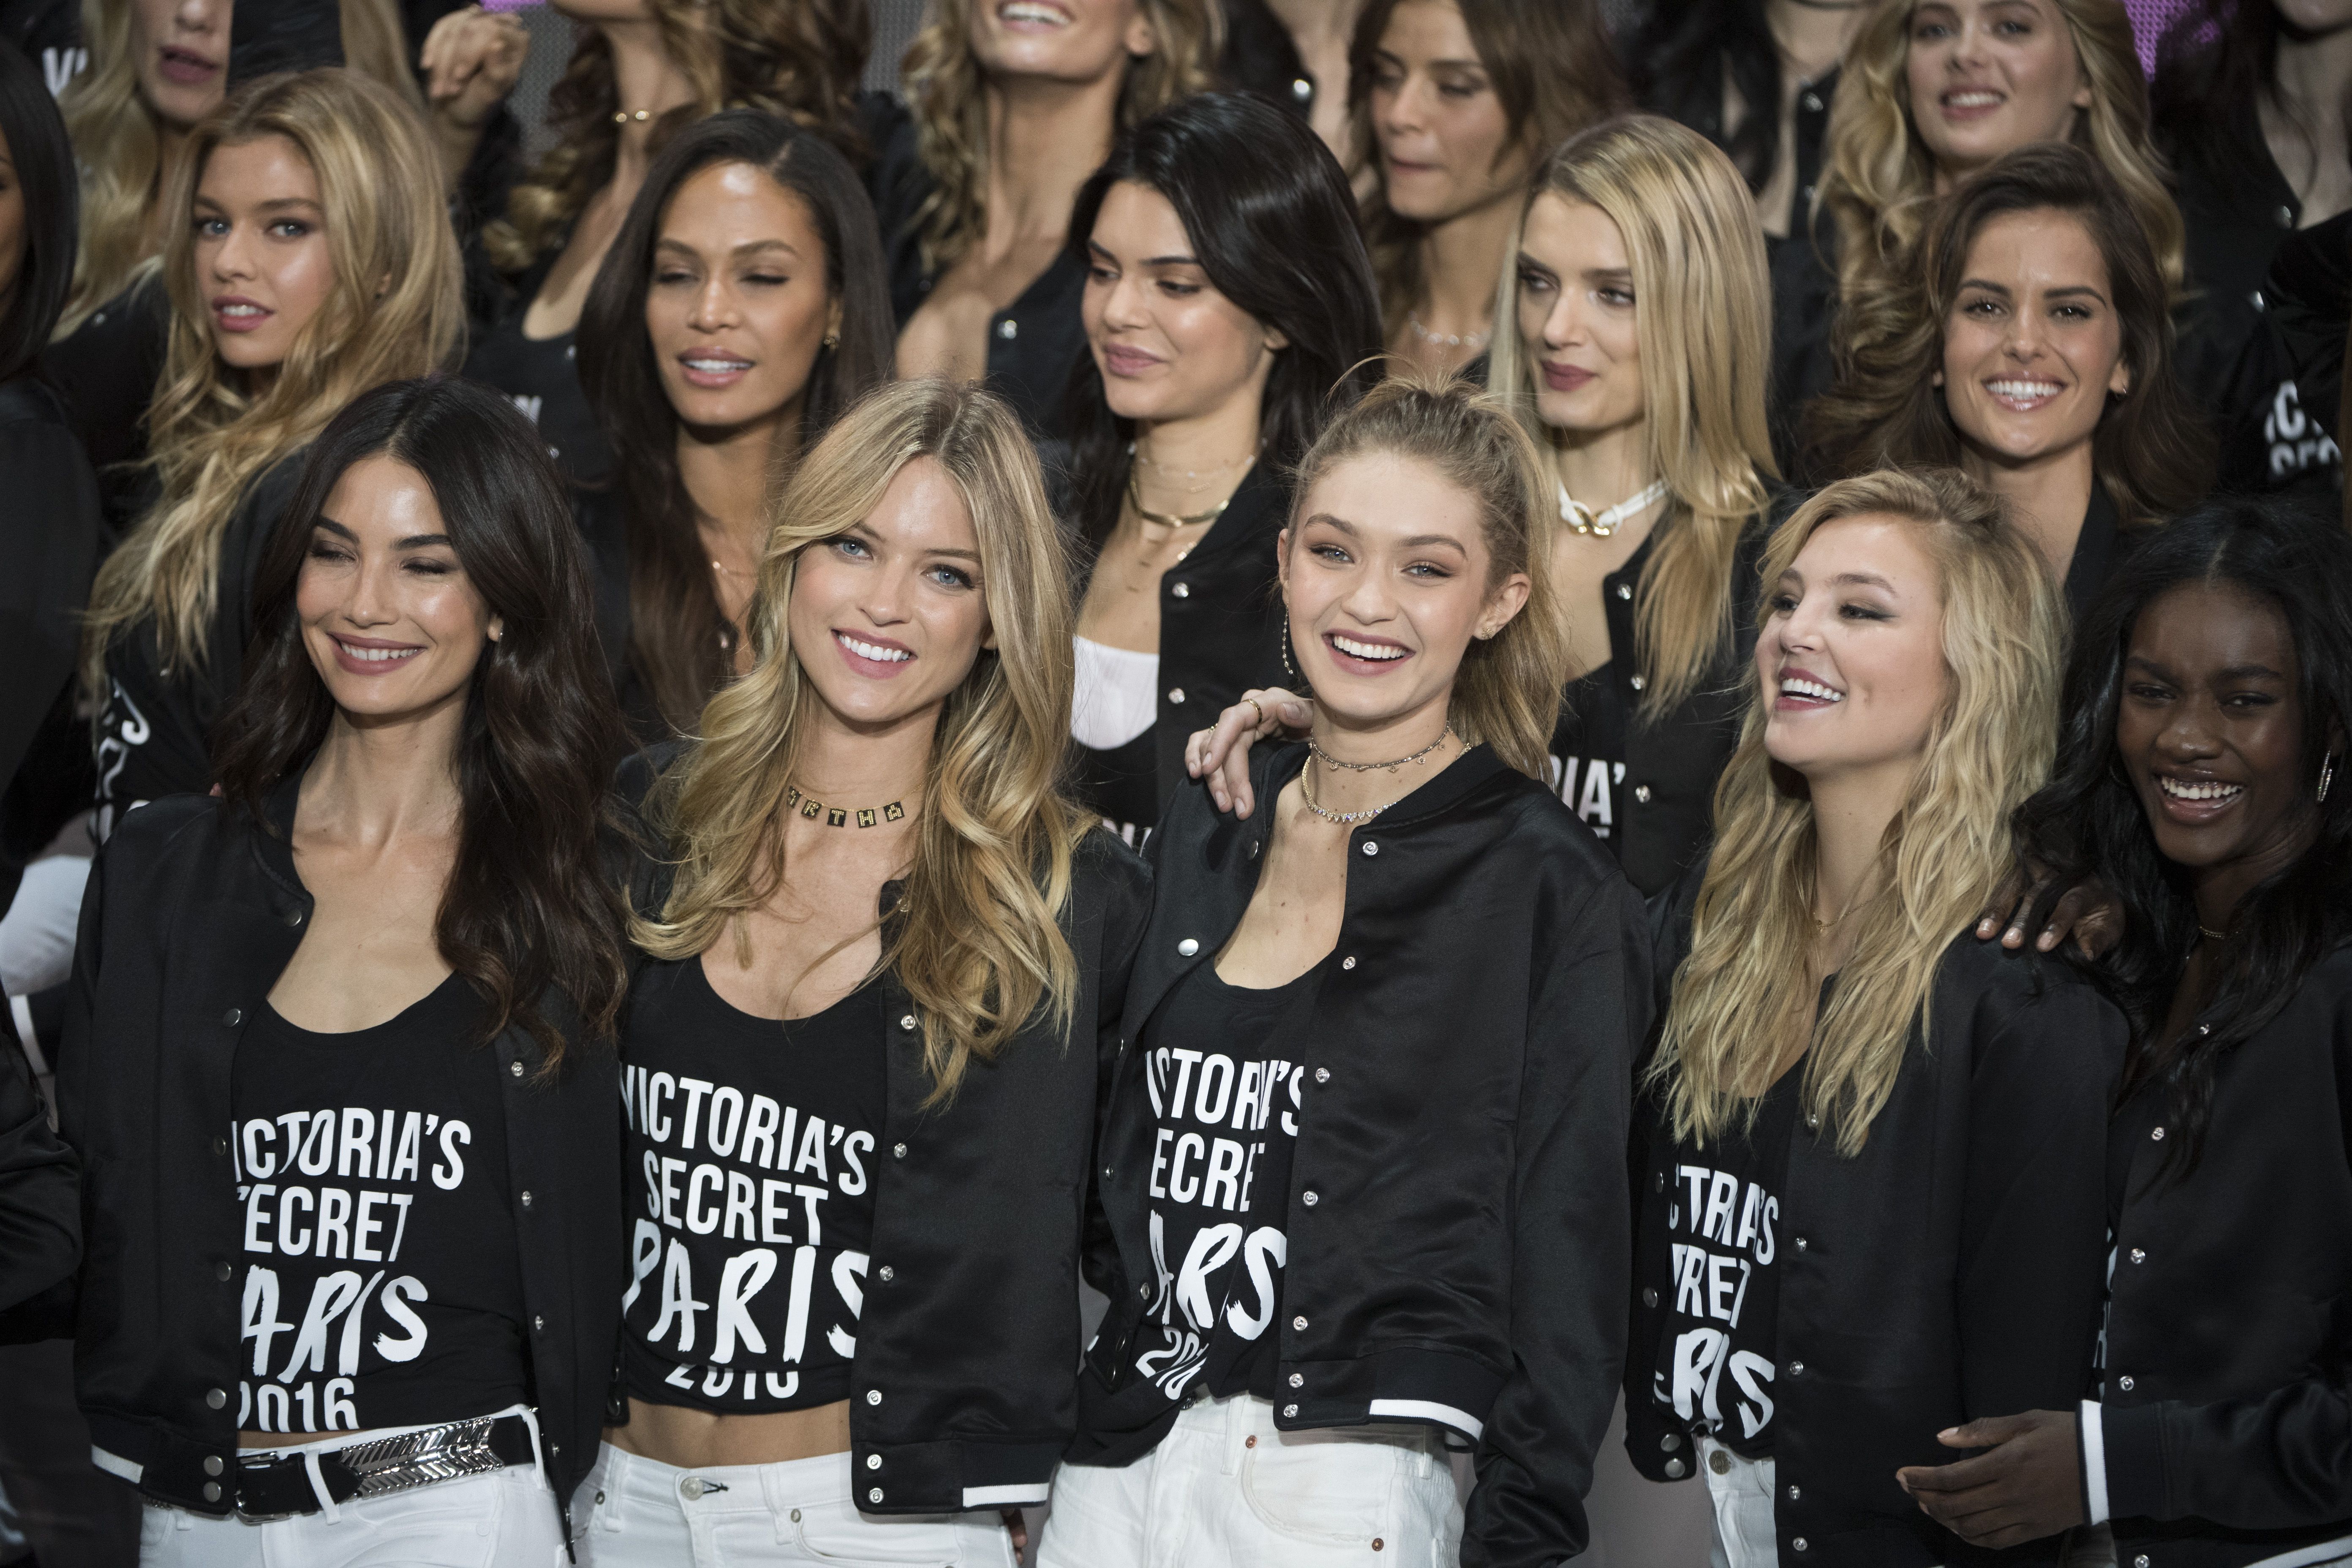 10 Steps To Create The Gorgeous Victoria Secret Waves This Summer